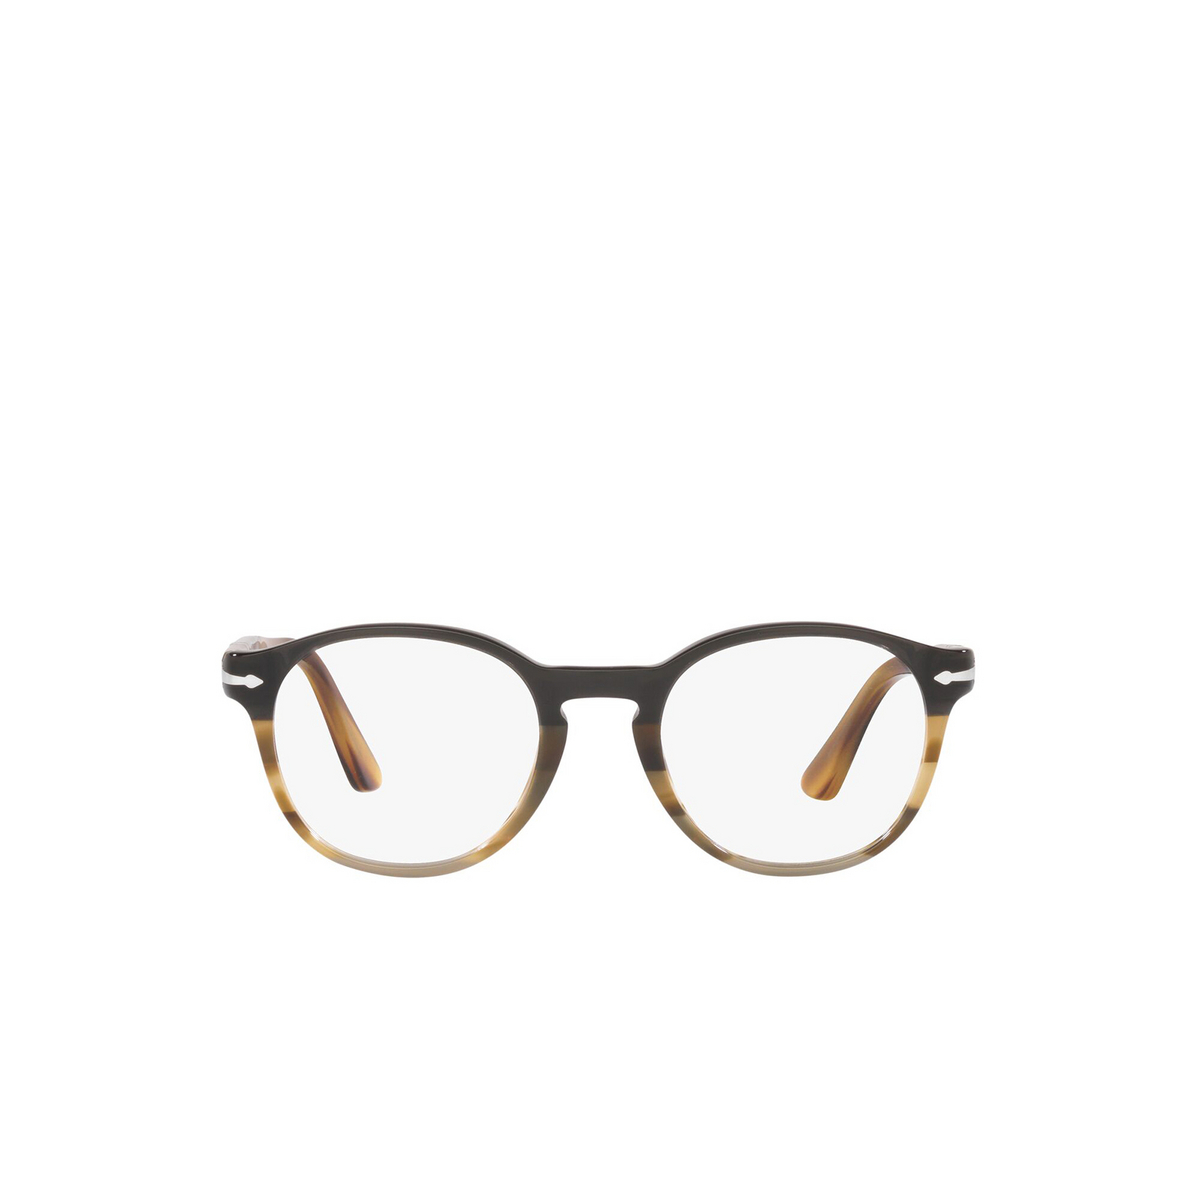 Persol® Round Eyeglasses: PO3284V color Black Cut Net Striped Brown Cu 1135 - front view.